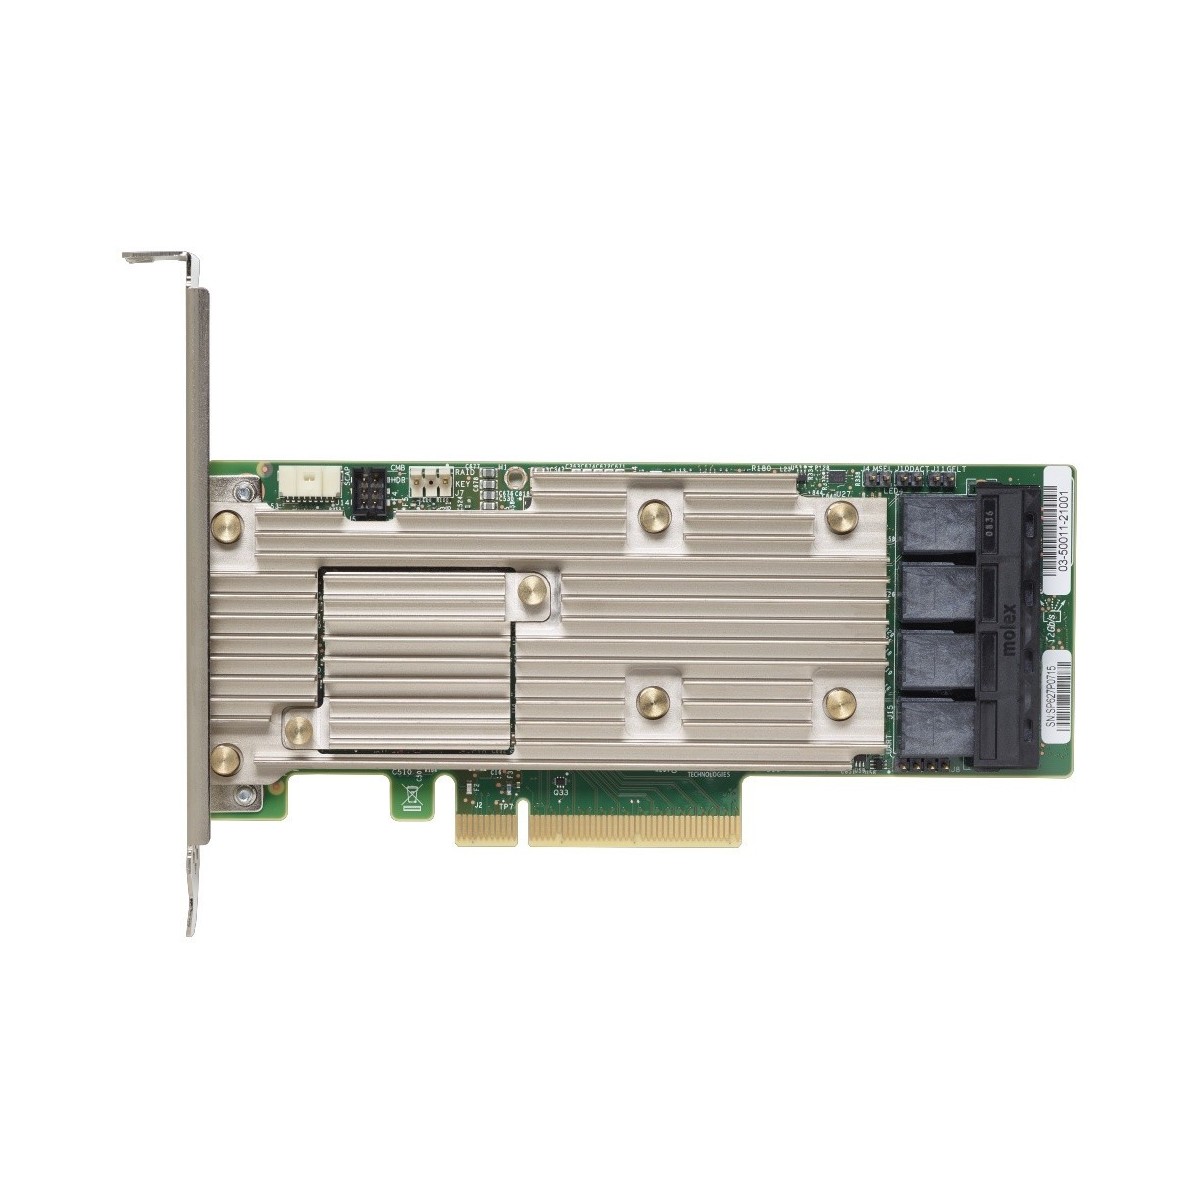 Lenovo 7Y37A01086 - Serial ATA,Serial Attached SCSI - PCI Express x8 - 0,1,5,6,10,50,60,JBOD - 12 Gbit/s - Full-height (low-prof